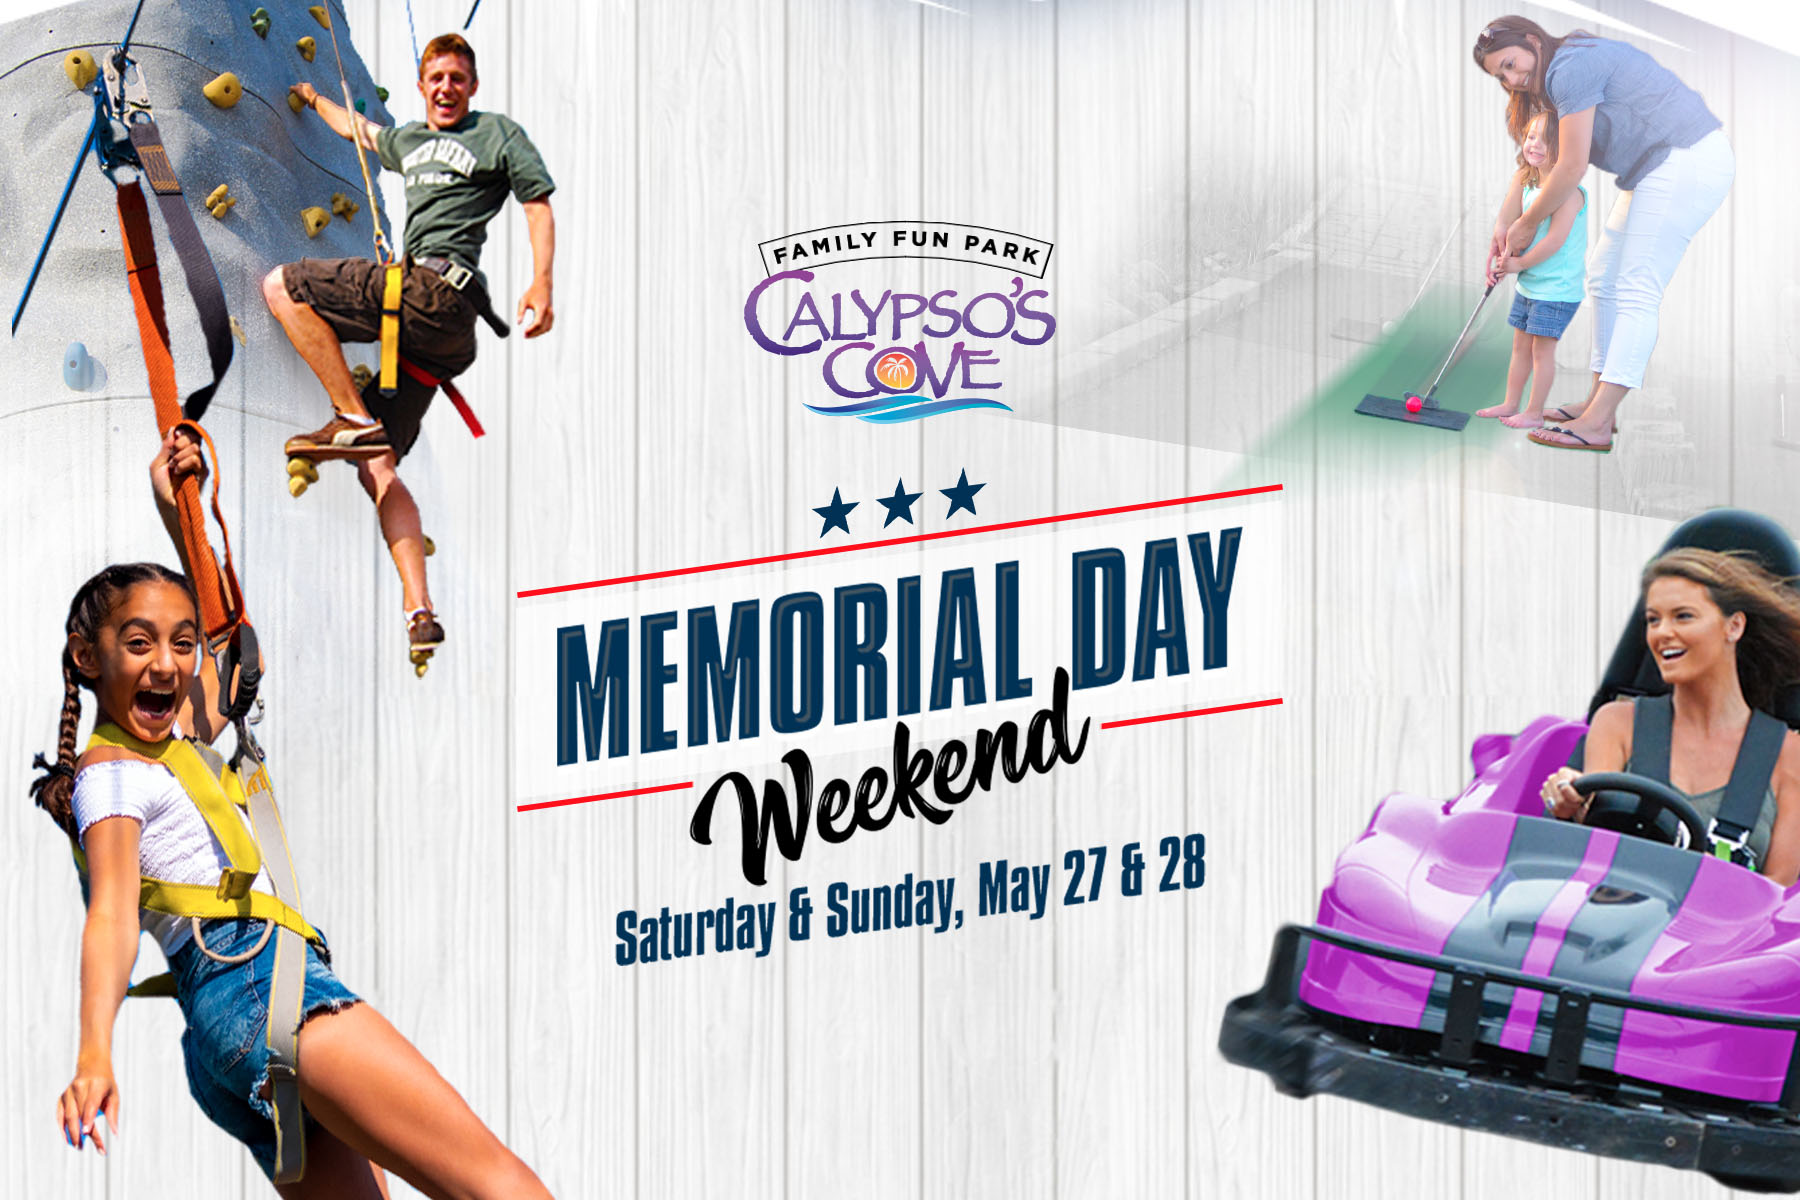 Memorial Day Weekend in Old Forge